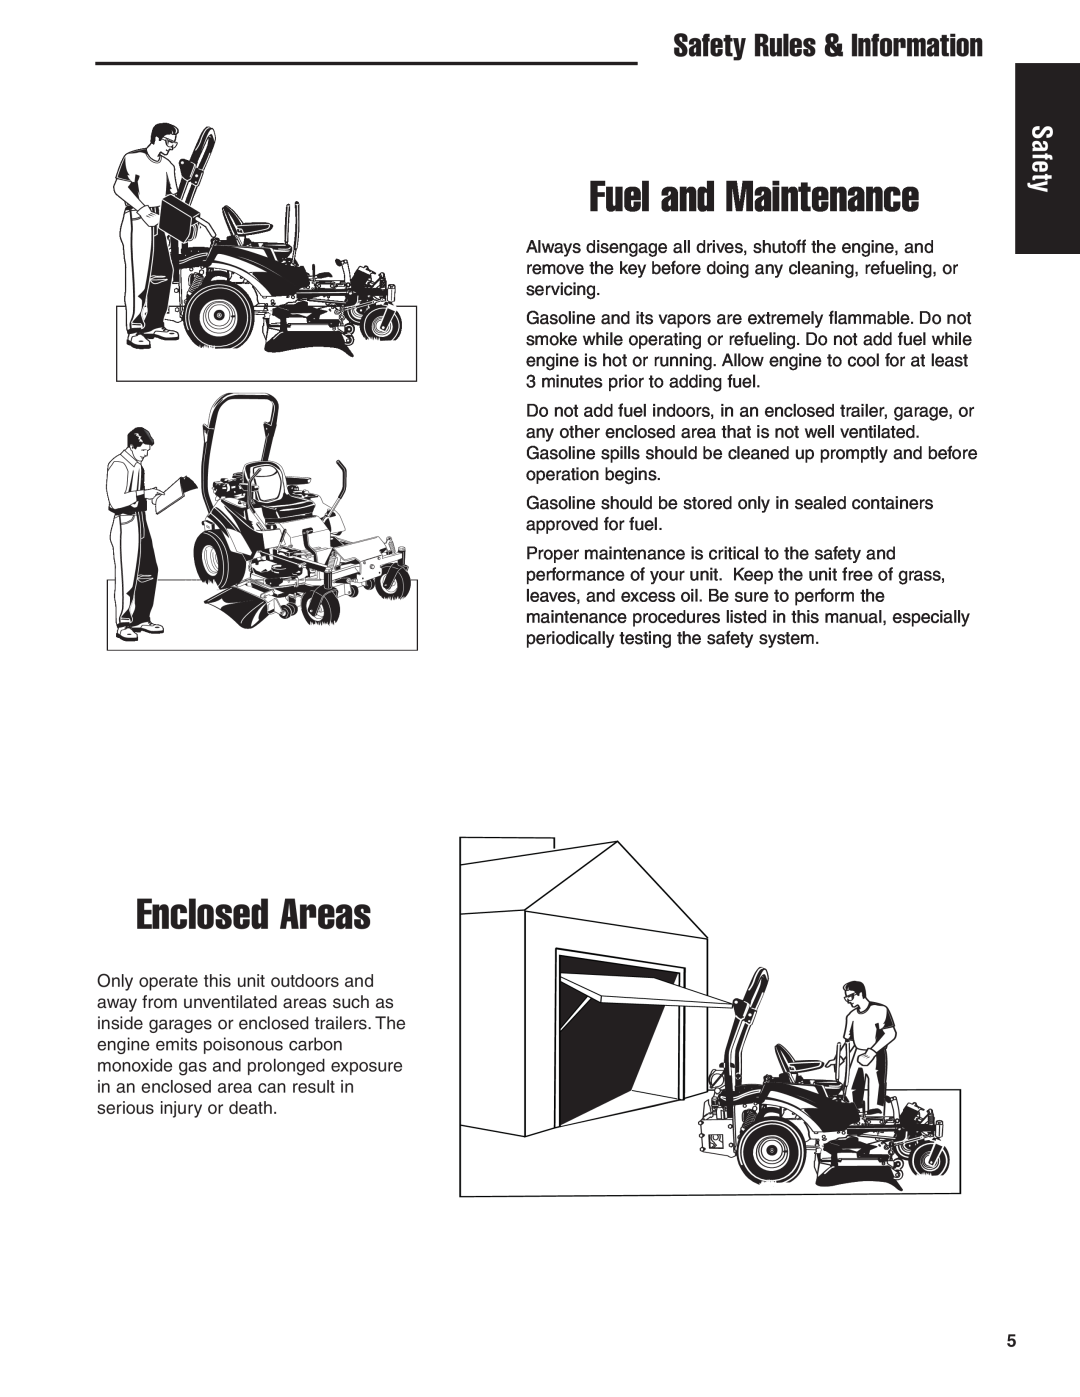 Ferris Industries 5900625, 5901170, 5900629, 5900624 manual Fuel and Maintenance, Enclosed Areas, Safety Rules & Information 